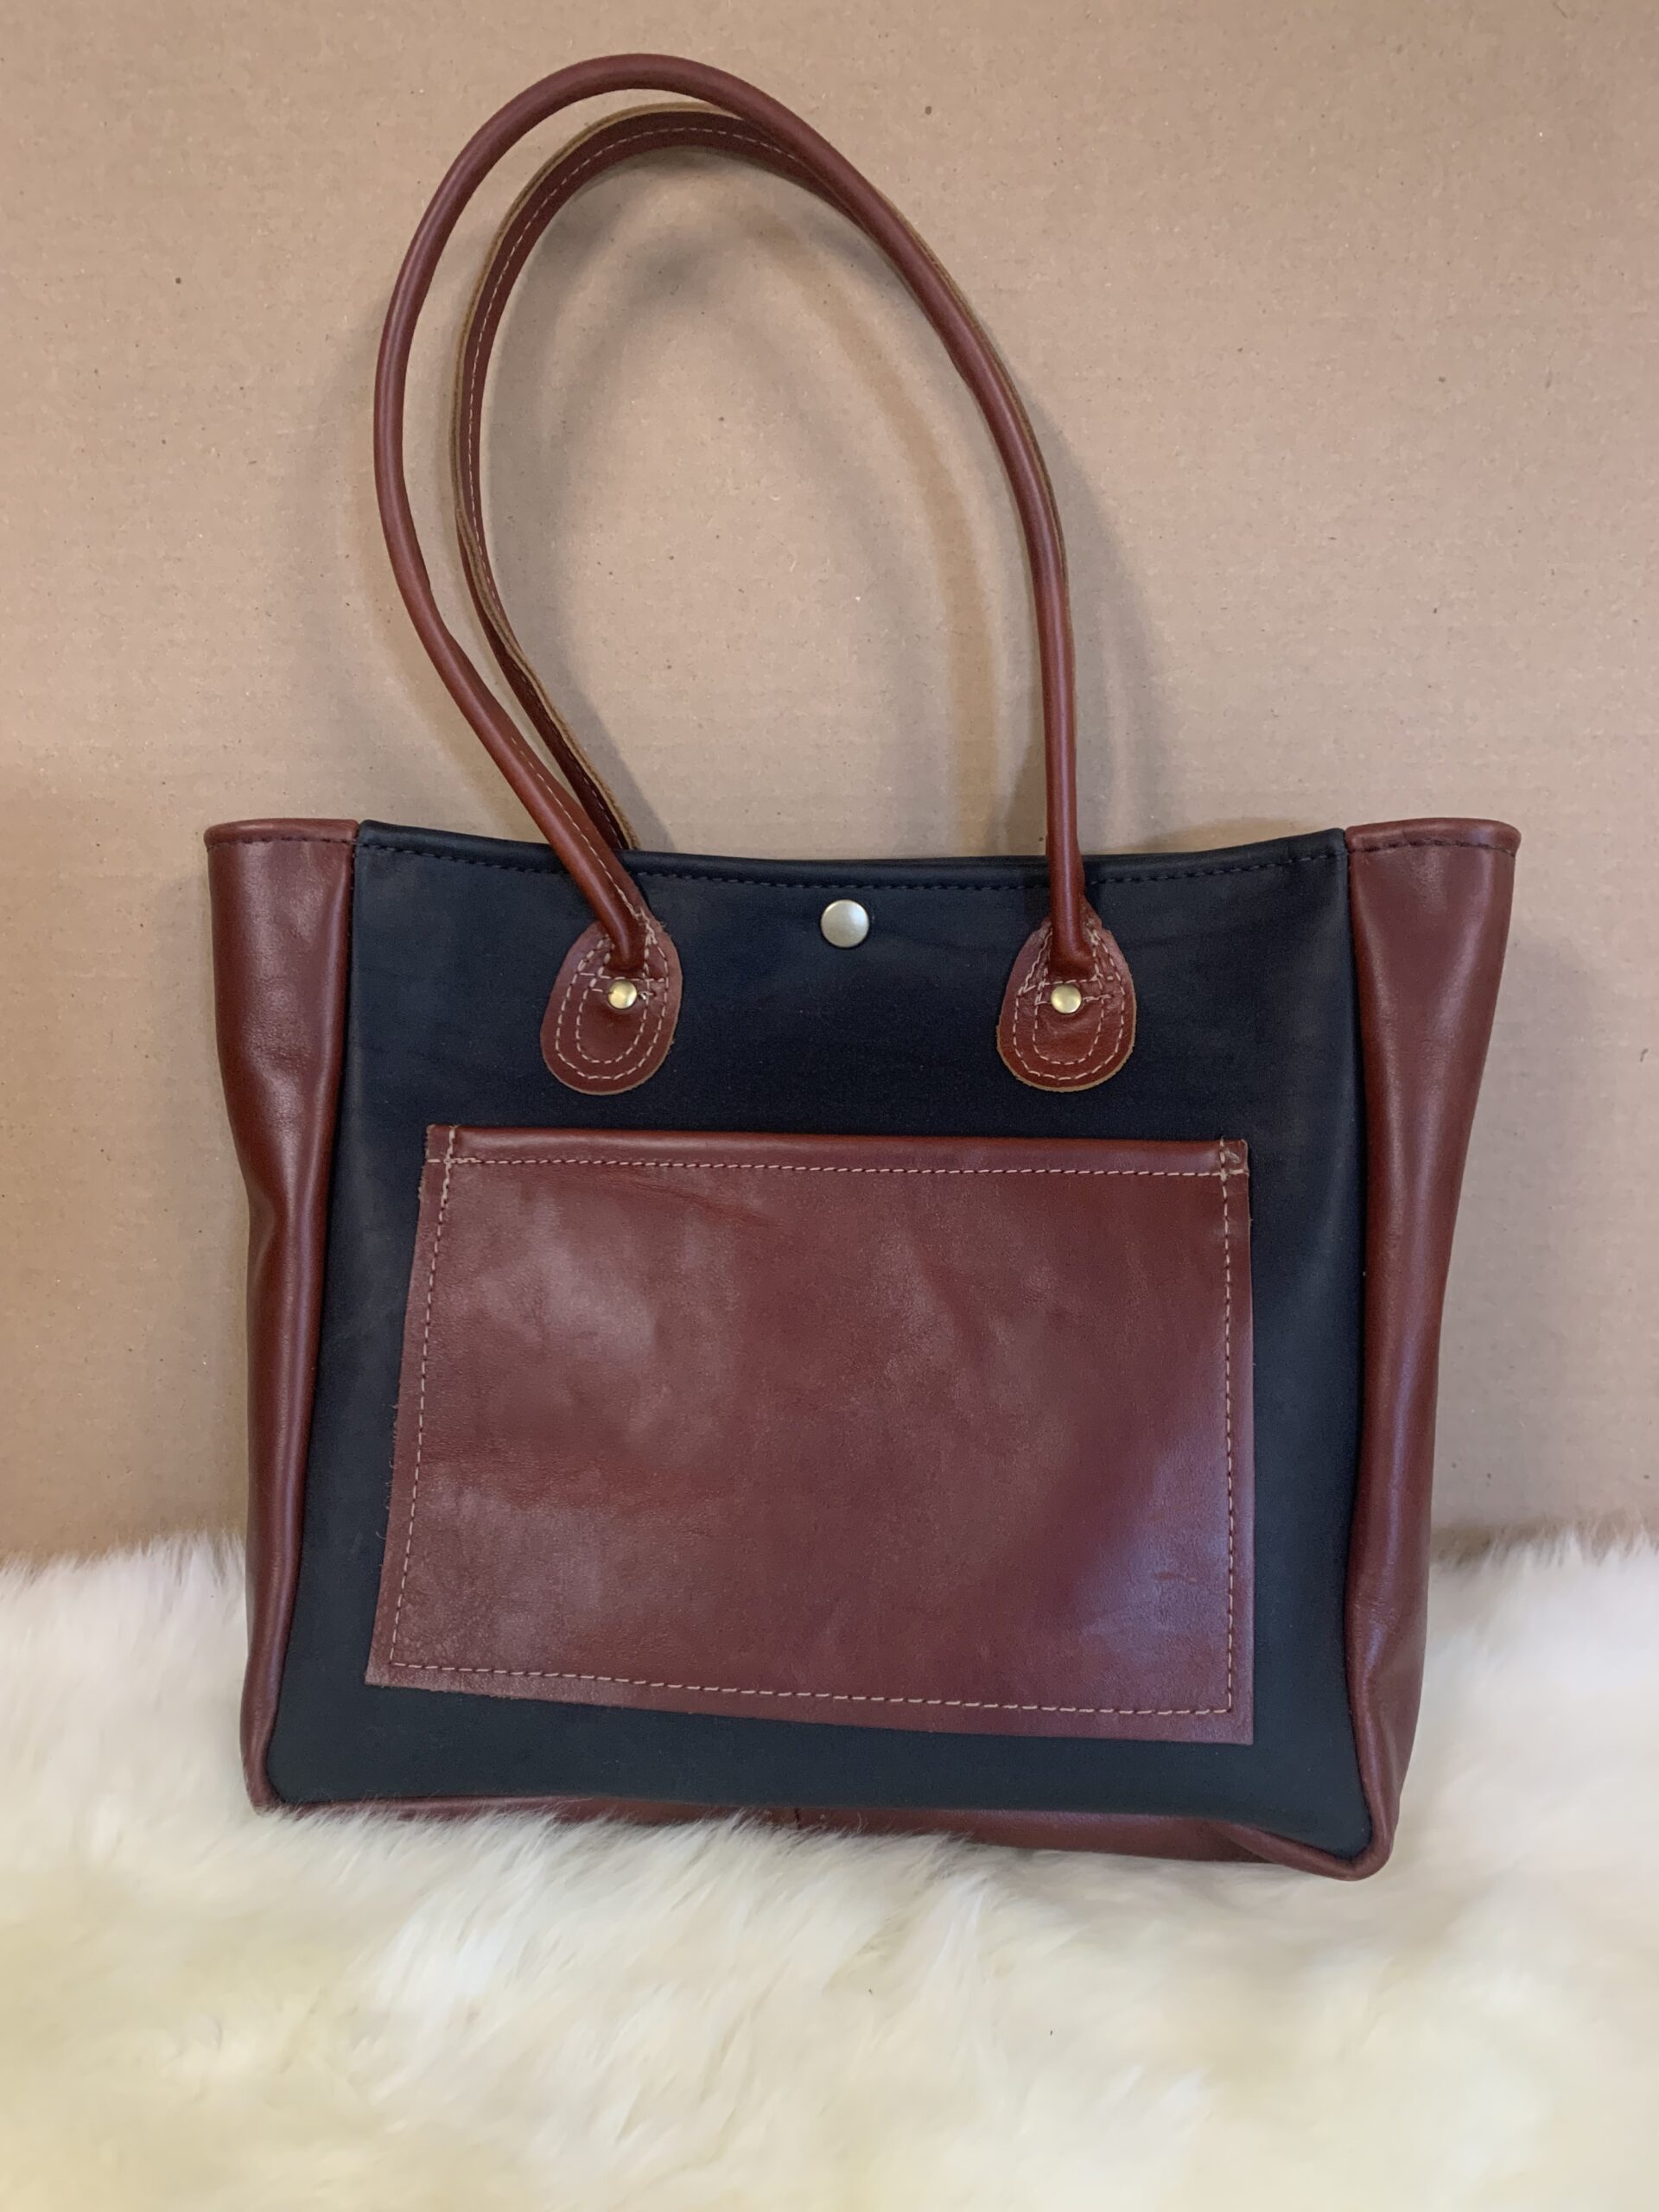 BARN BAG - Tote Bags made in Maine, USA - Deerfield Leathers